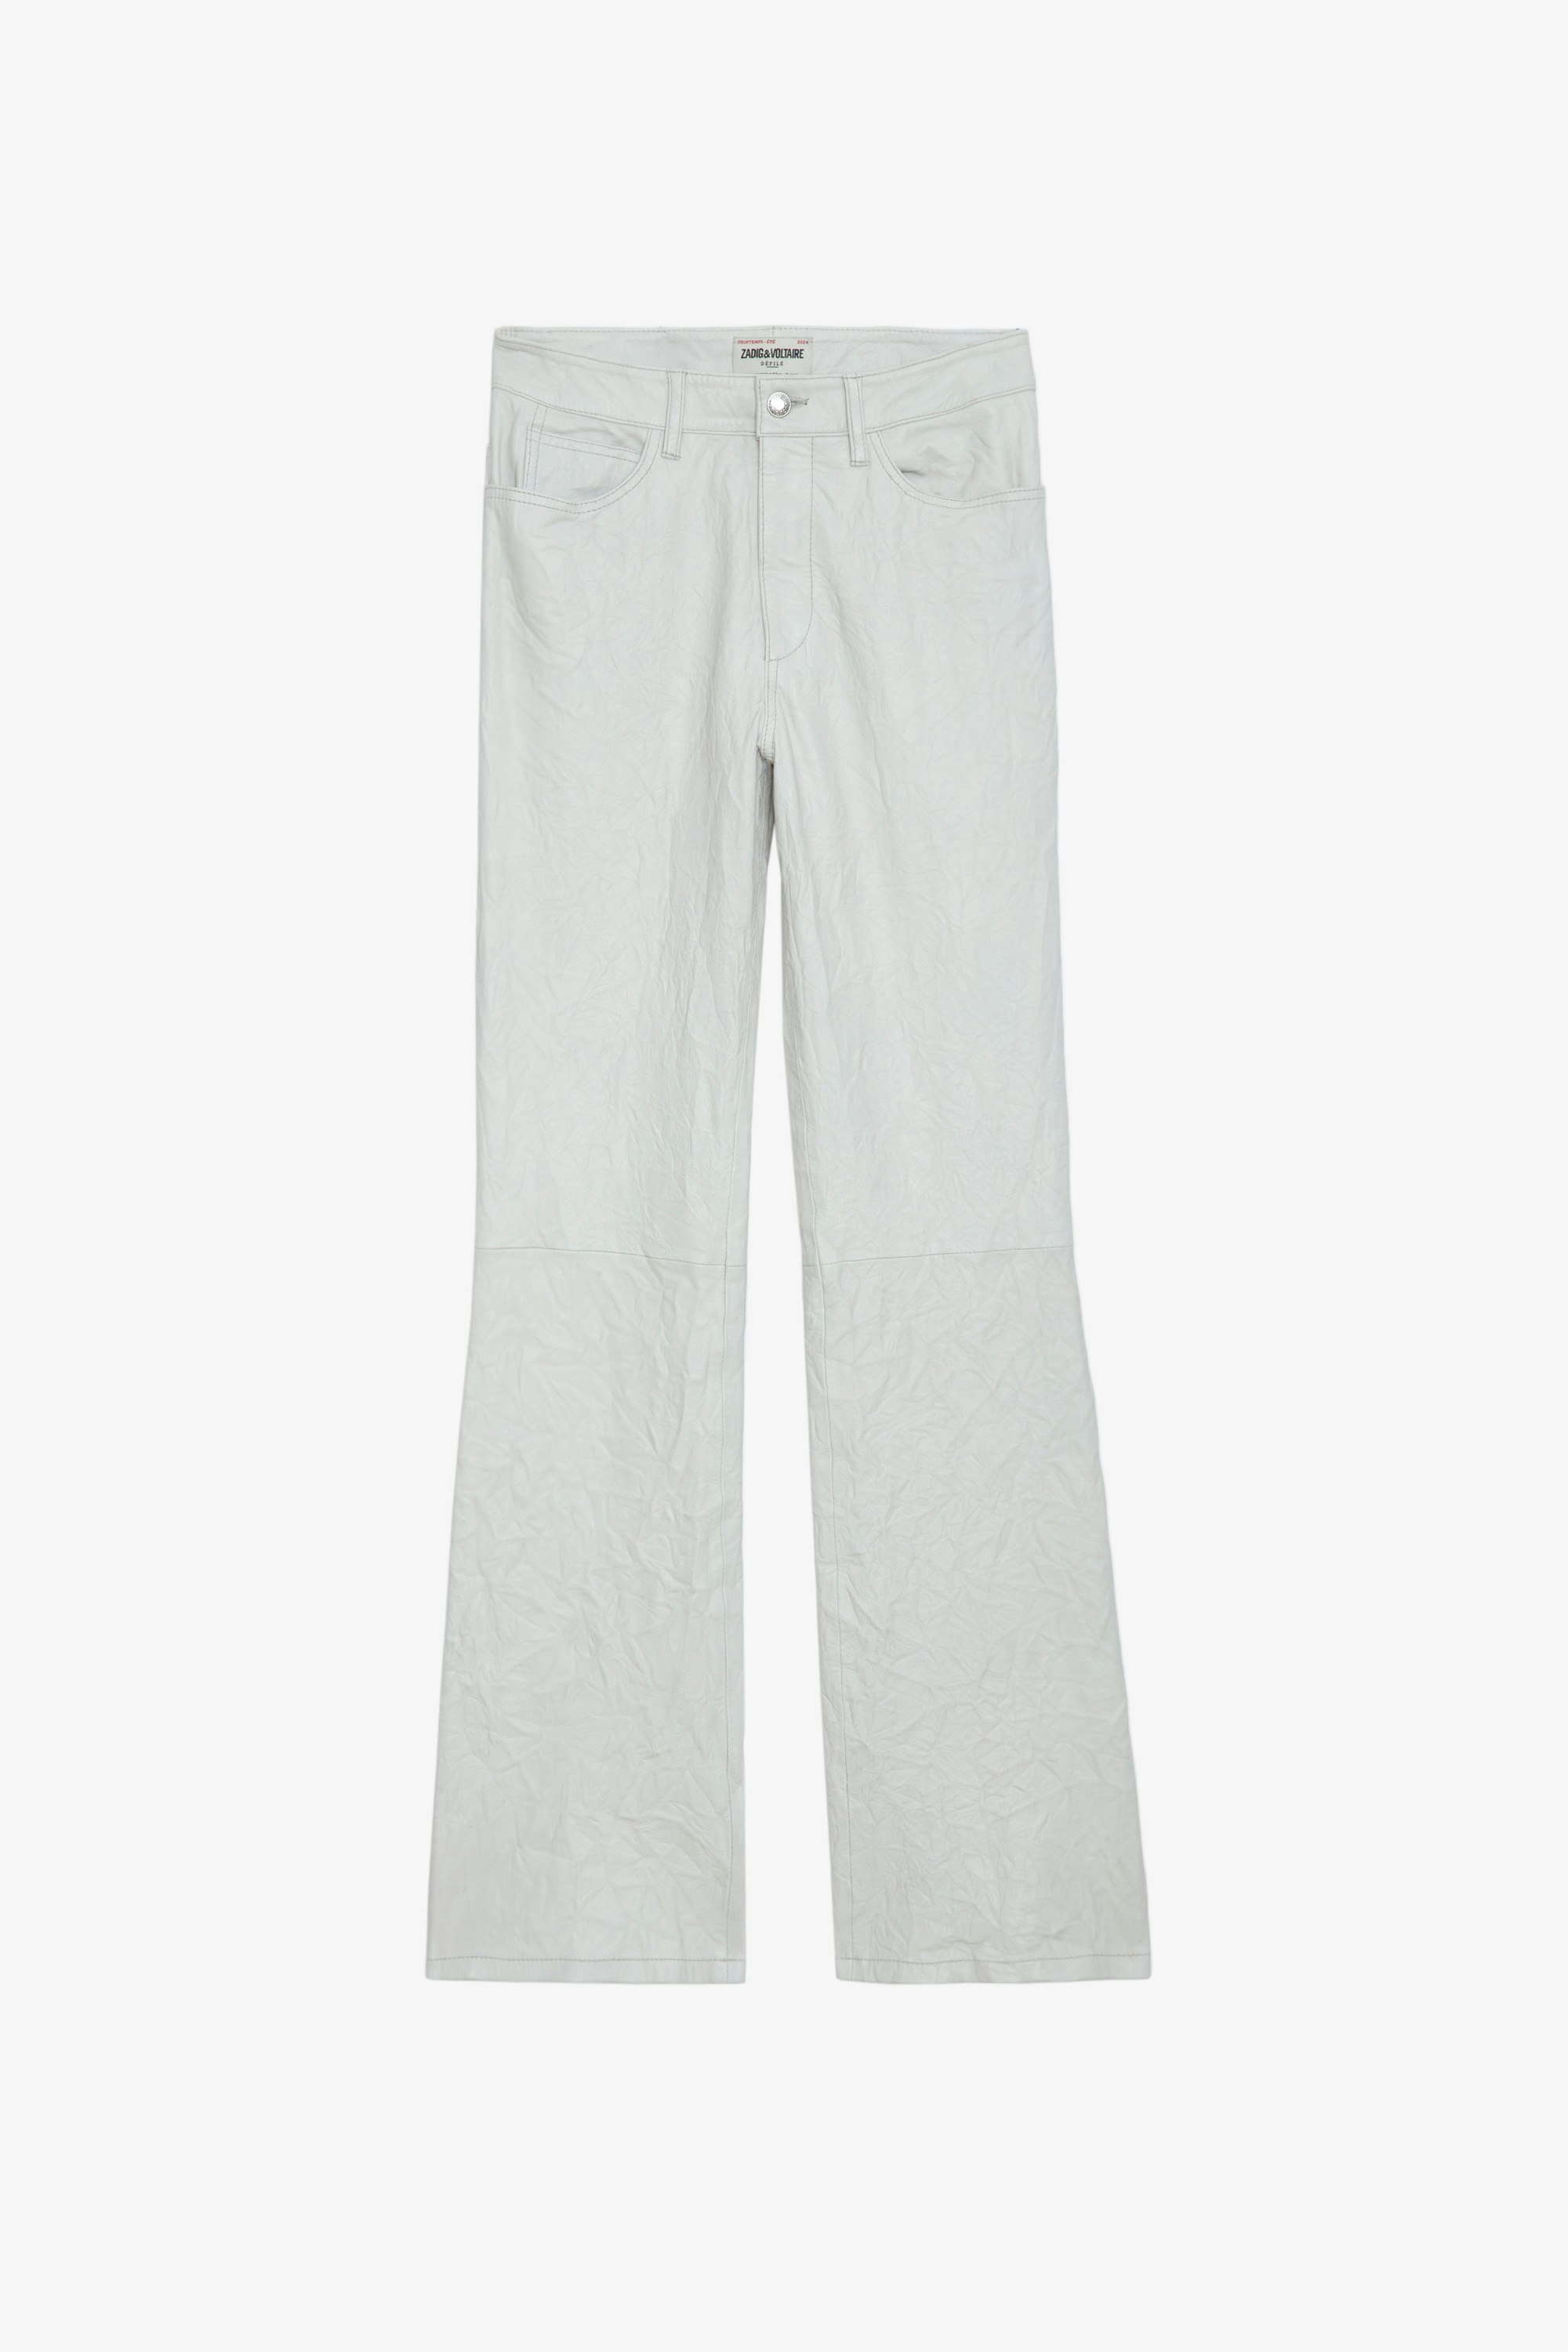 Pistol Crinkled Leather Trousers - White flared tailored trousers in crinkled leather with pockets.